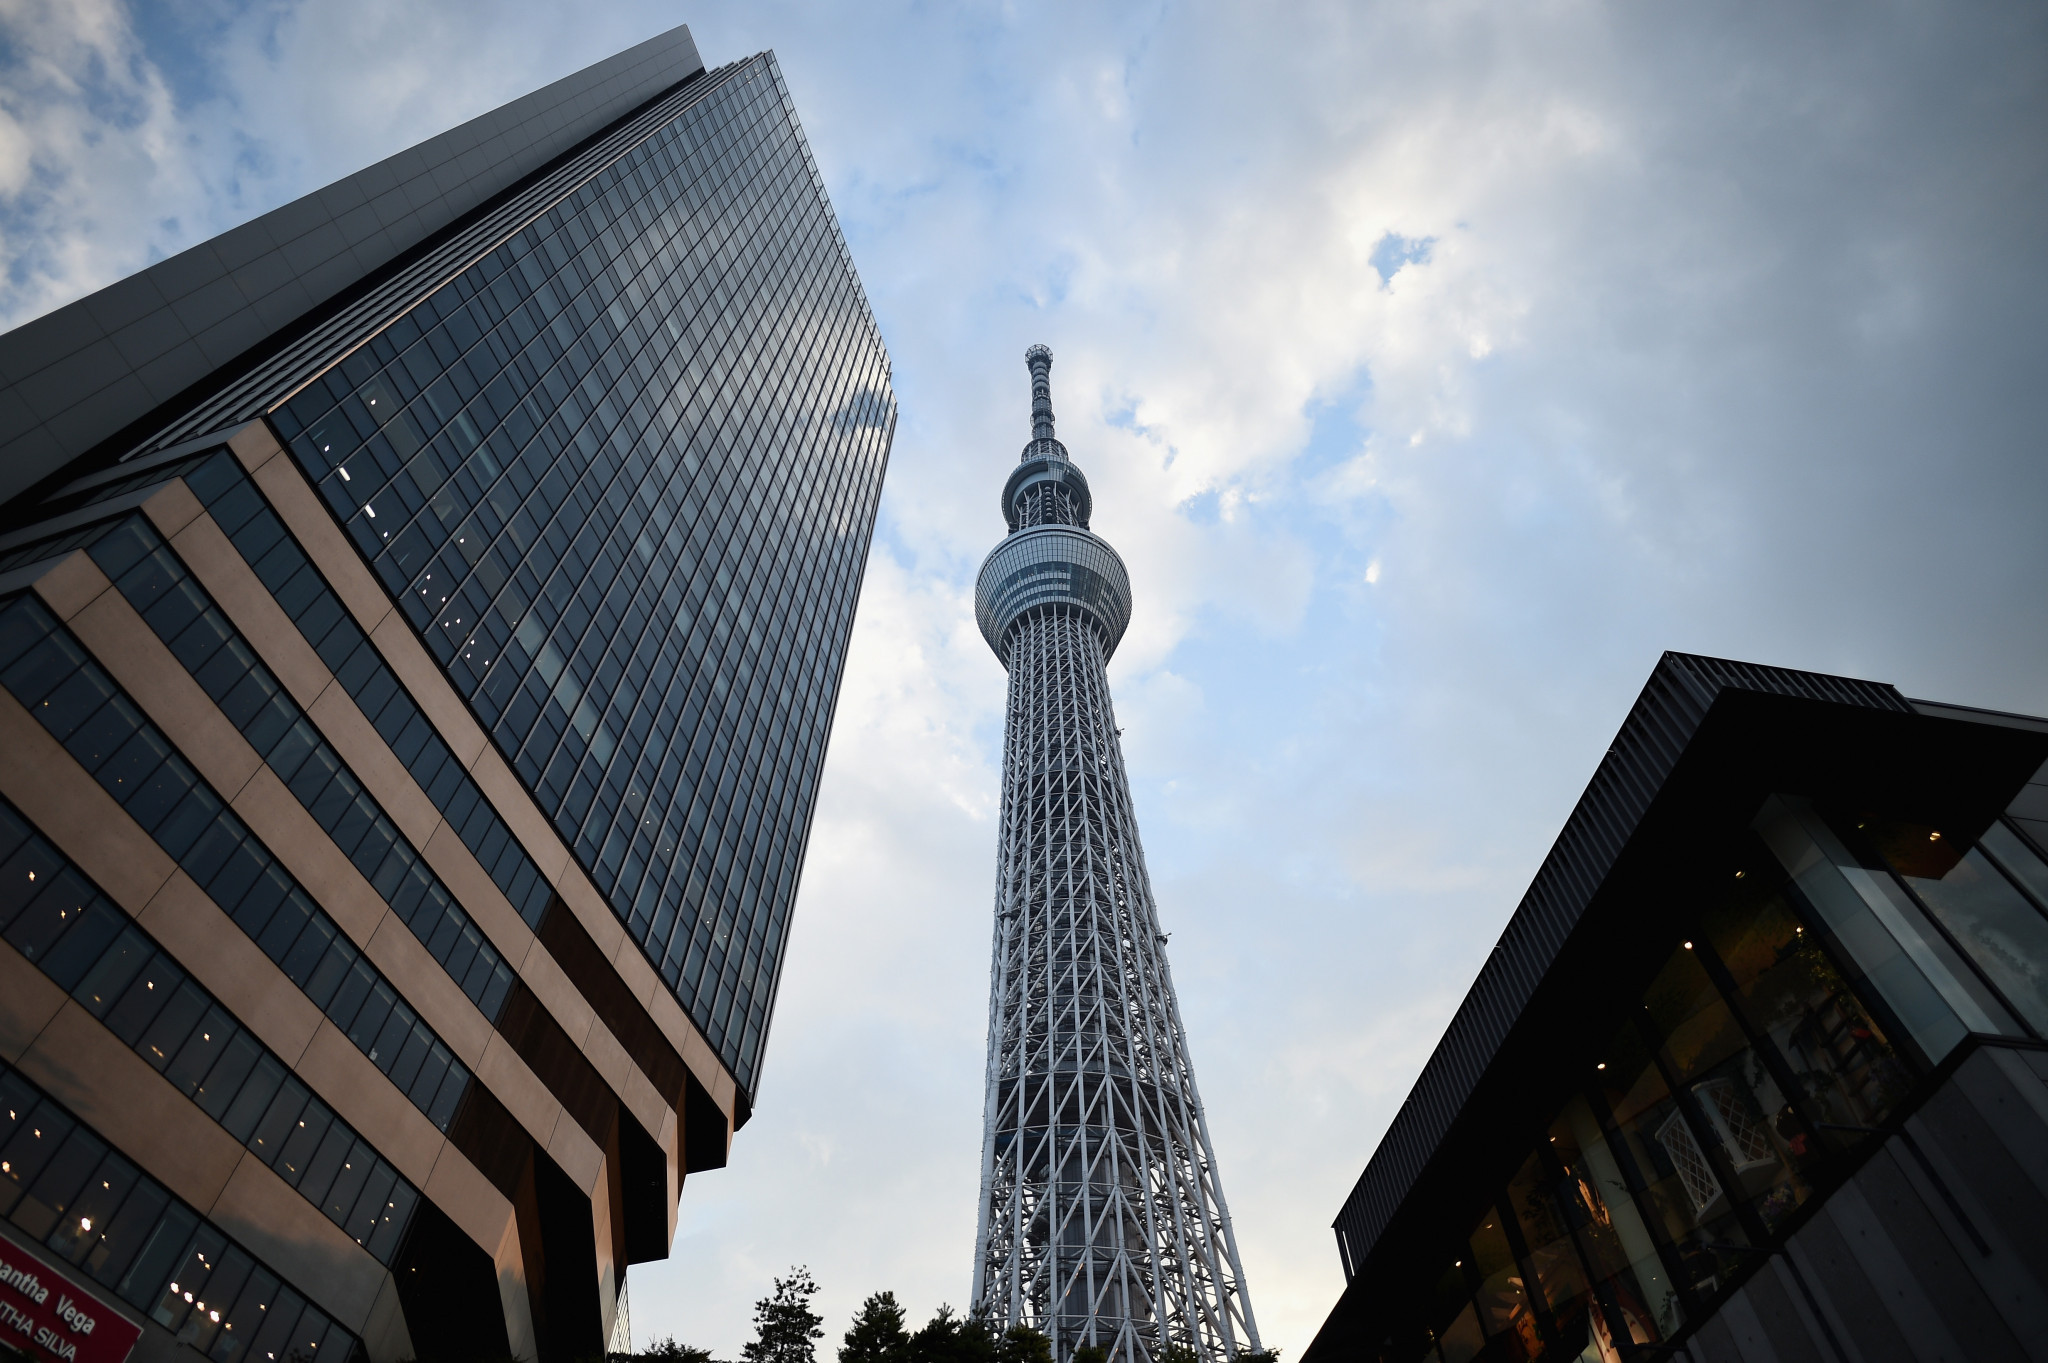 Tokyo 2020 has announced a deal with Tokyo Skytree ©Getty Images